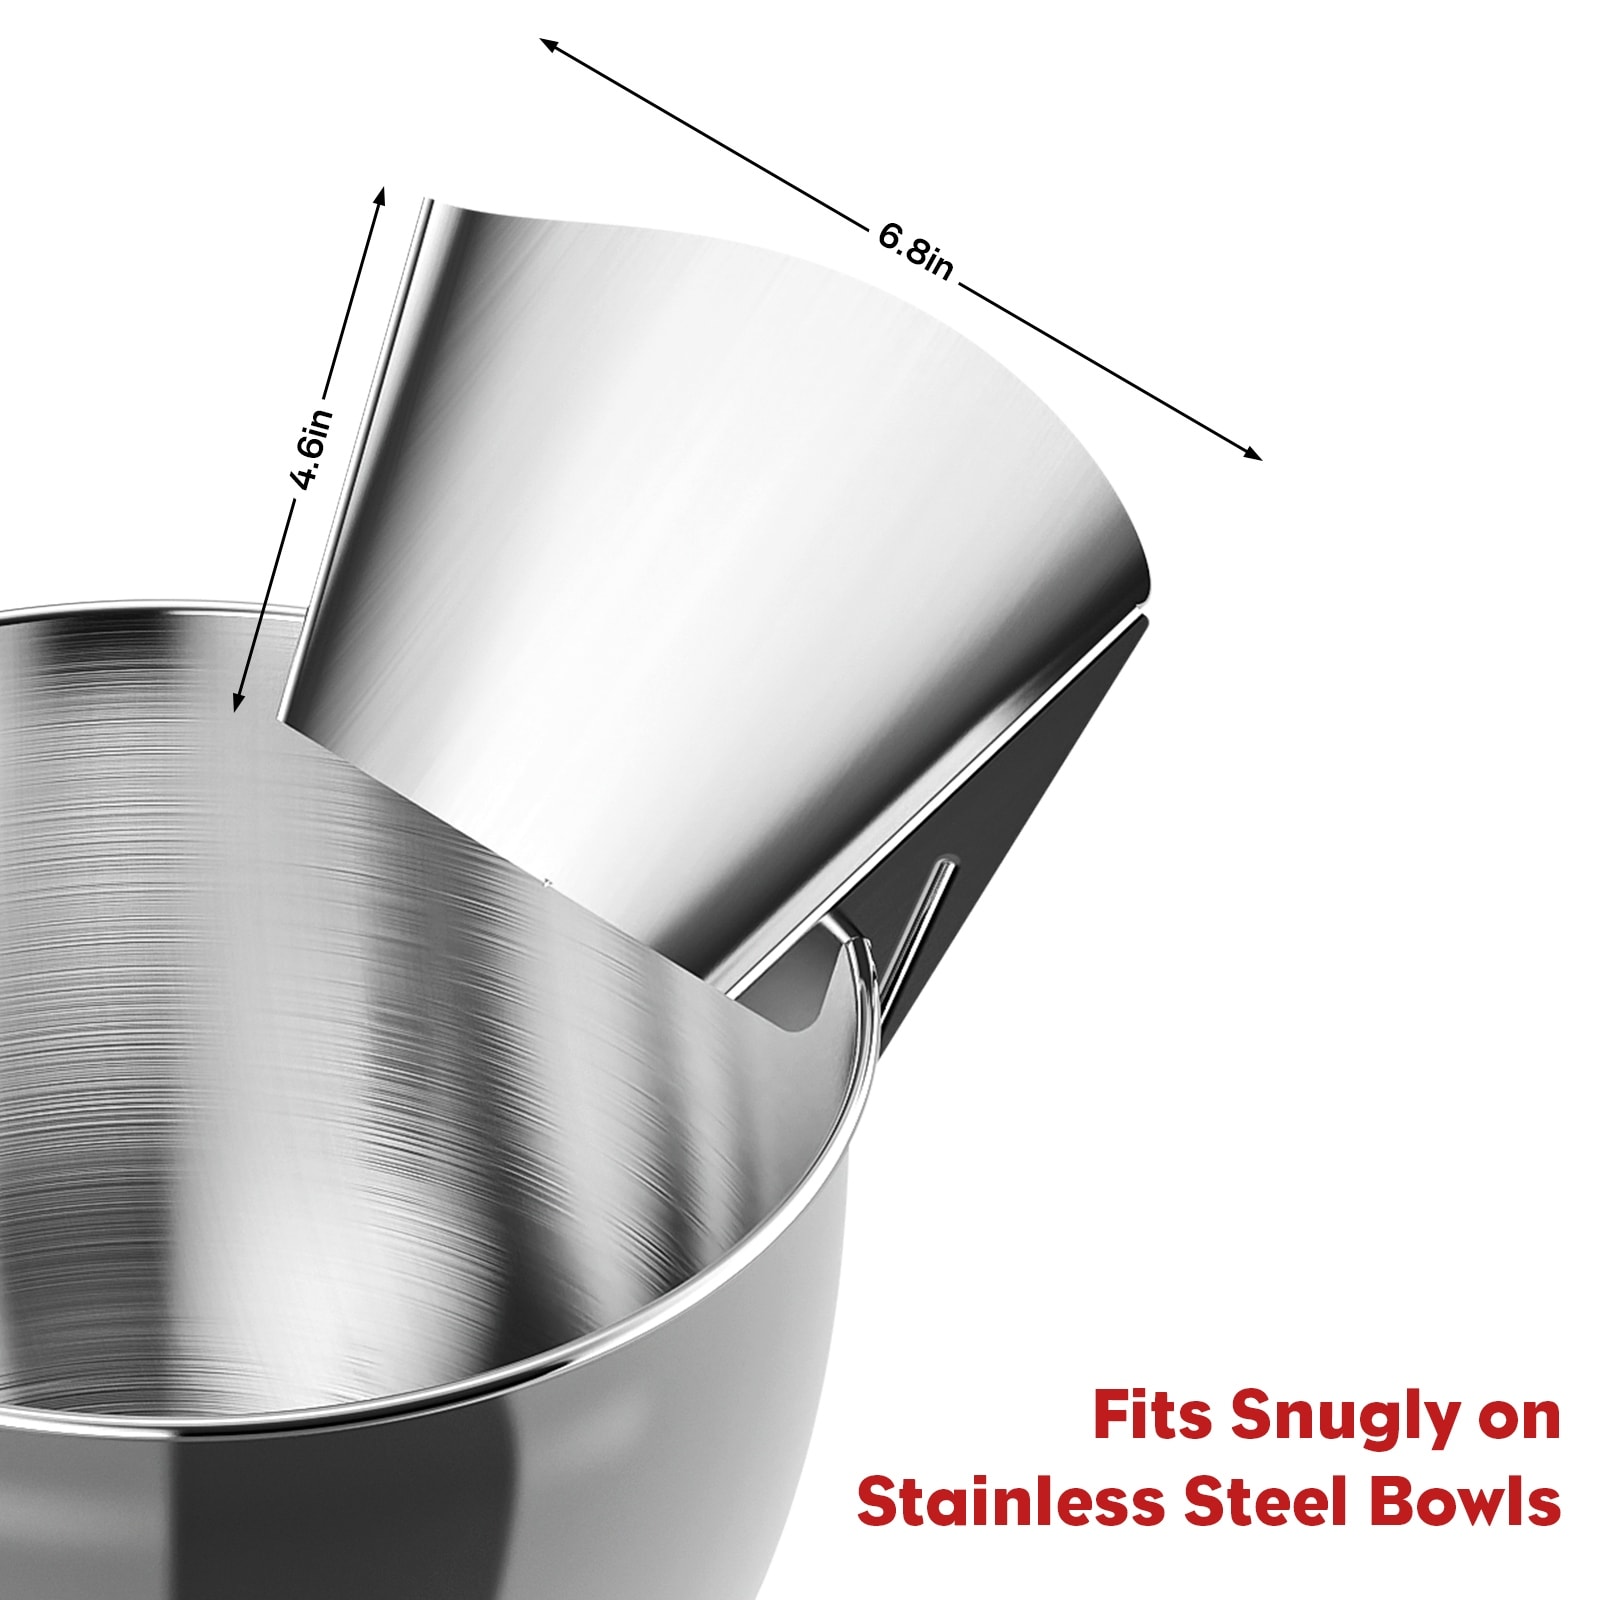 Stainless Steel Pouring Chute,Pouring Chute Compatible with